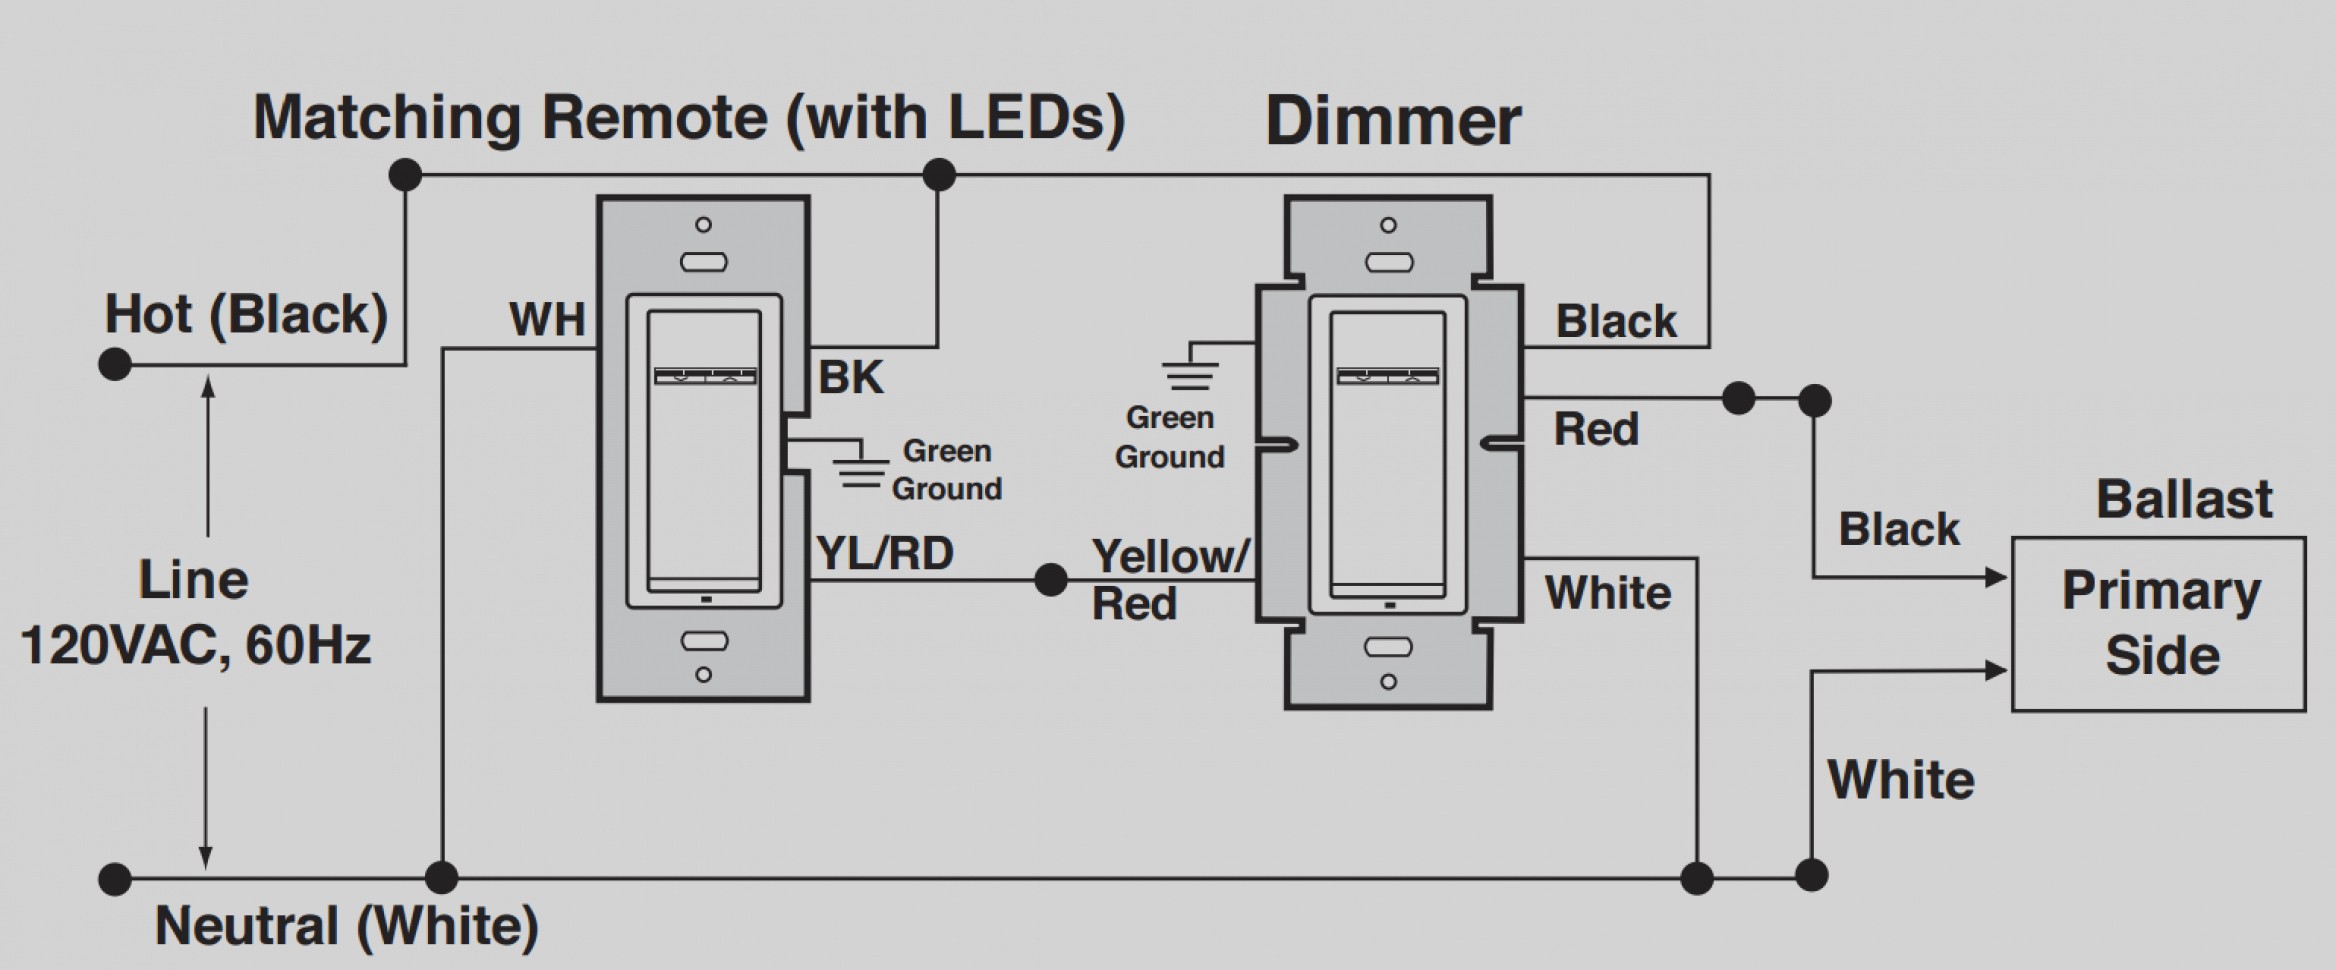 Wonderful Wiring Diagram For Motion Detector With 3 Way Switches e Dimmer Switch Steamcard Me